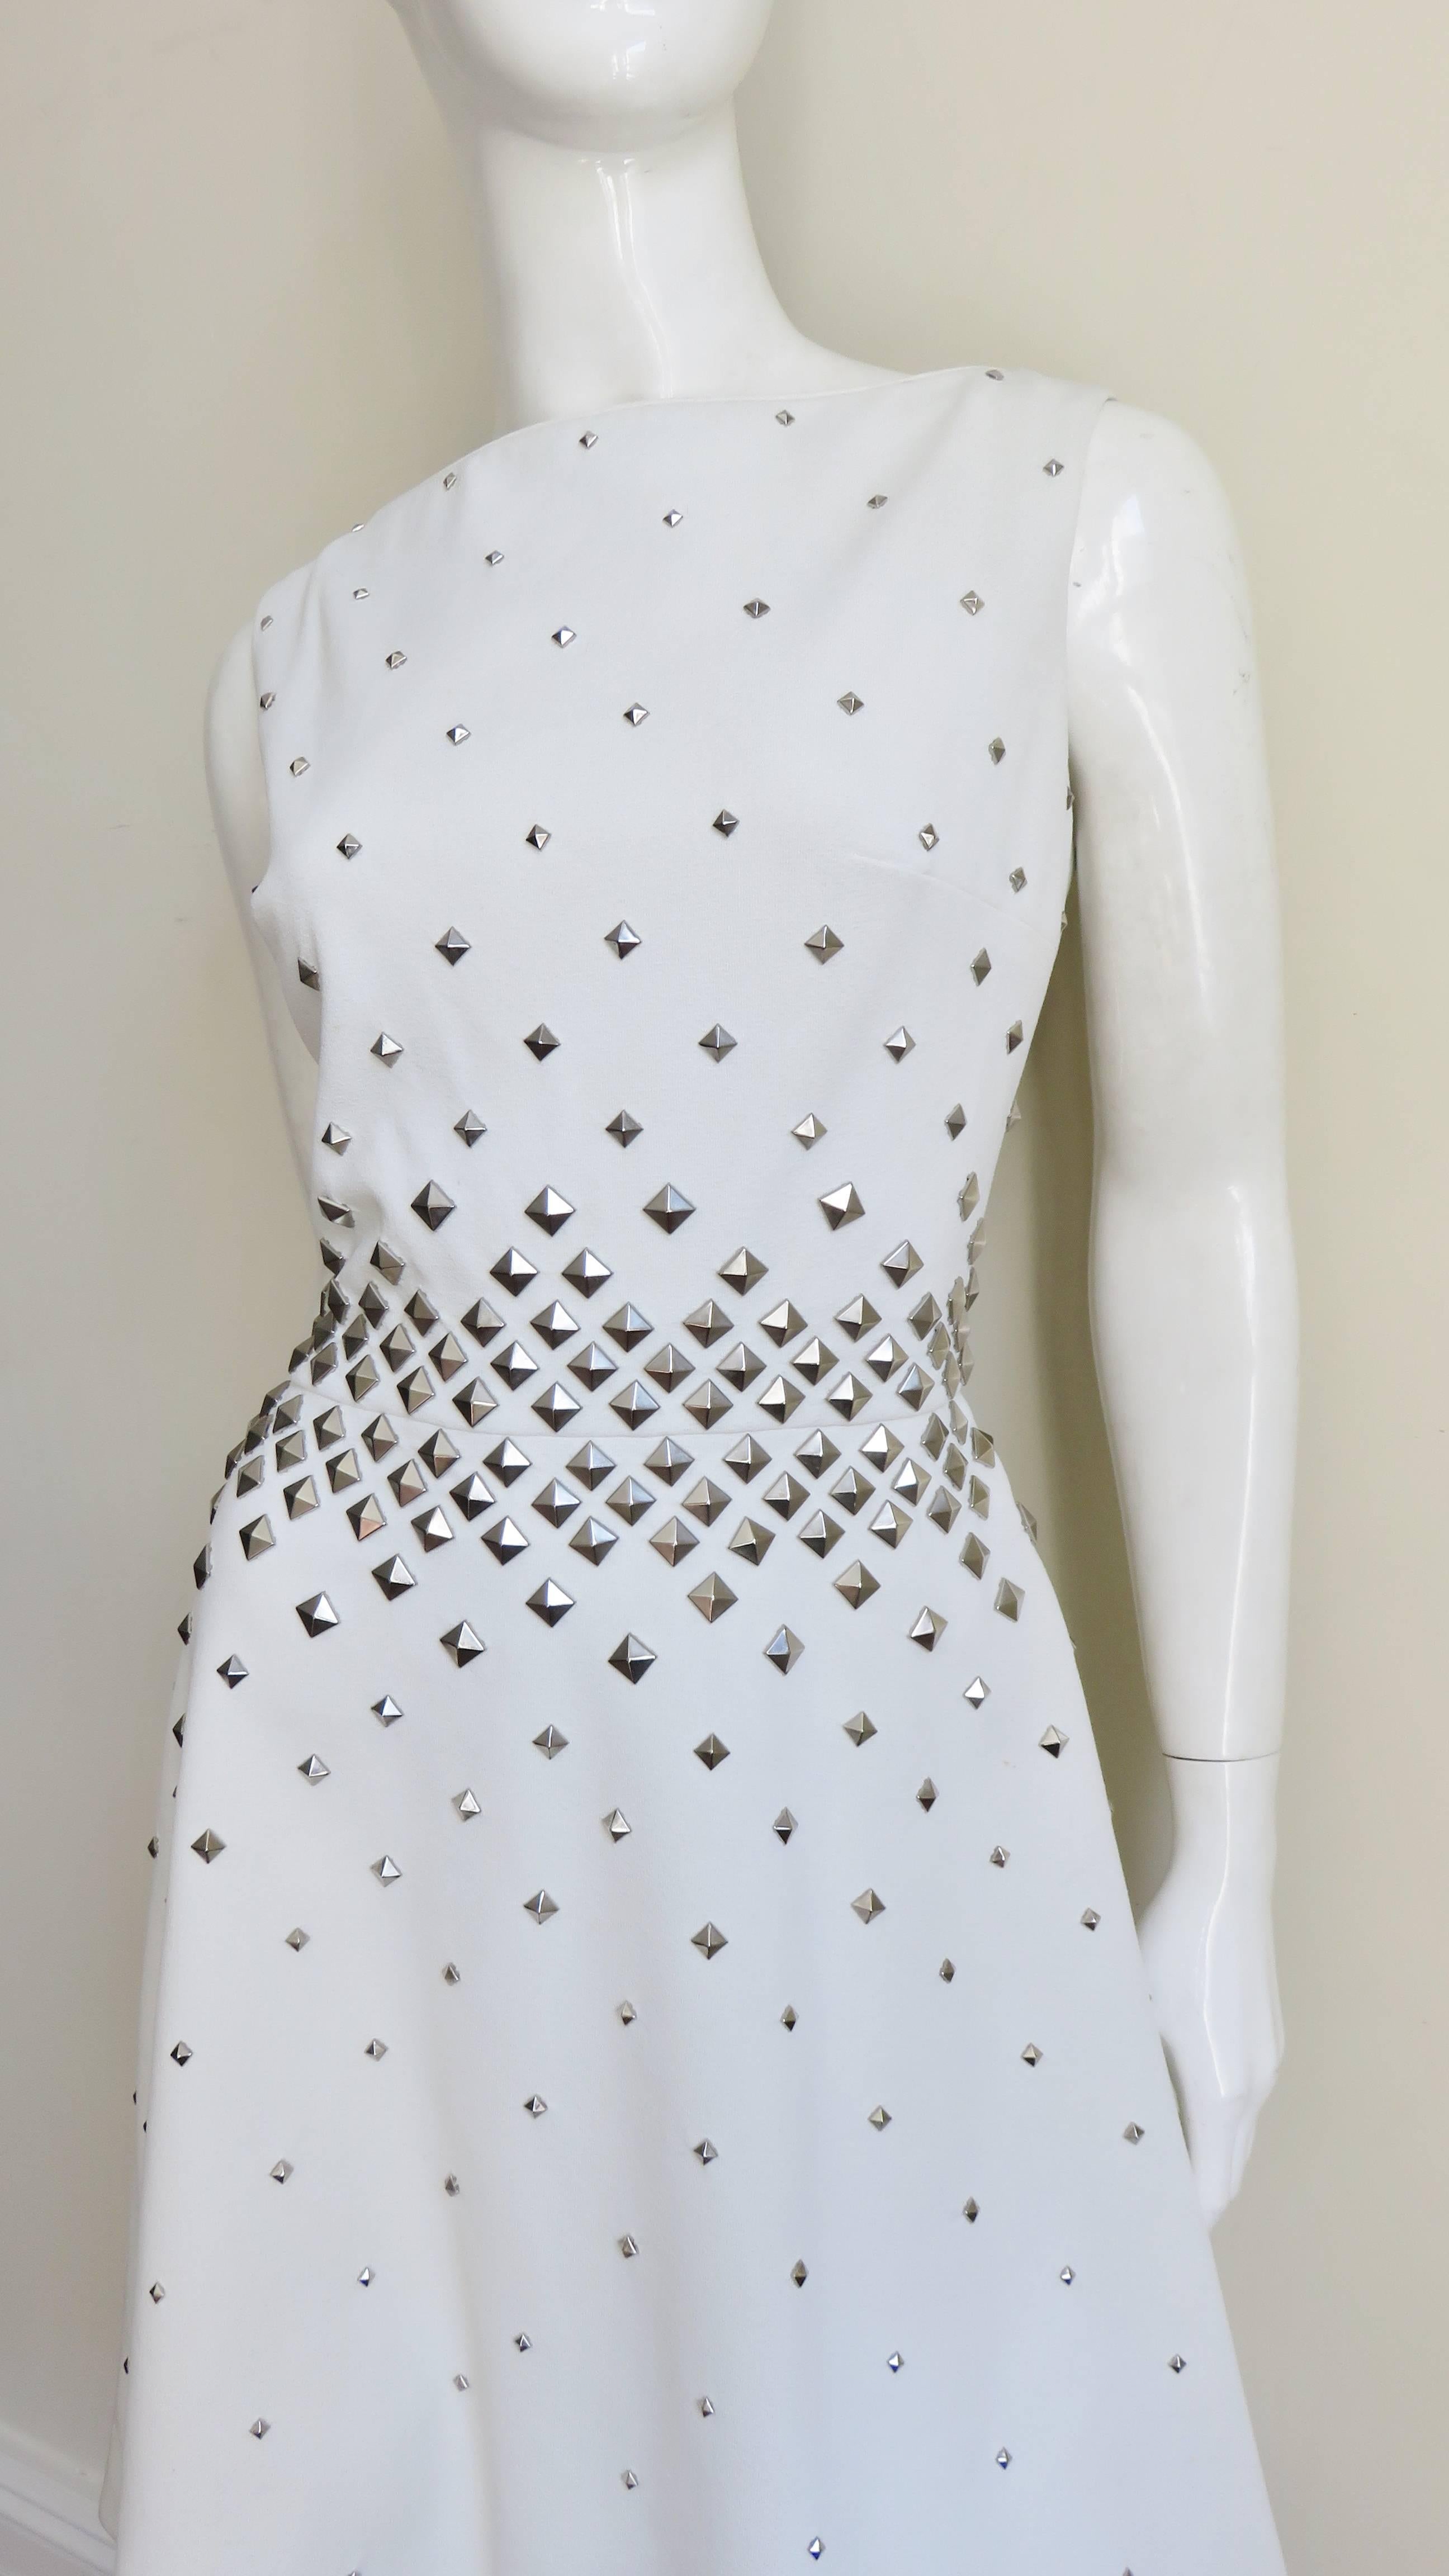 A great white jersey dress by Sydney North covered in silver studs.  It is sleeveless with a semi fitted waist and full skirt.  The waist is adorned with silver metal studs which decrease in size and spread out as they move away from the waist.  It